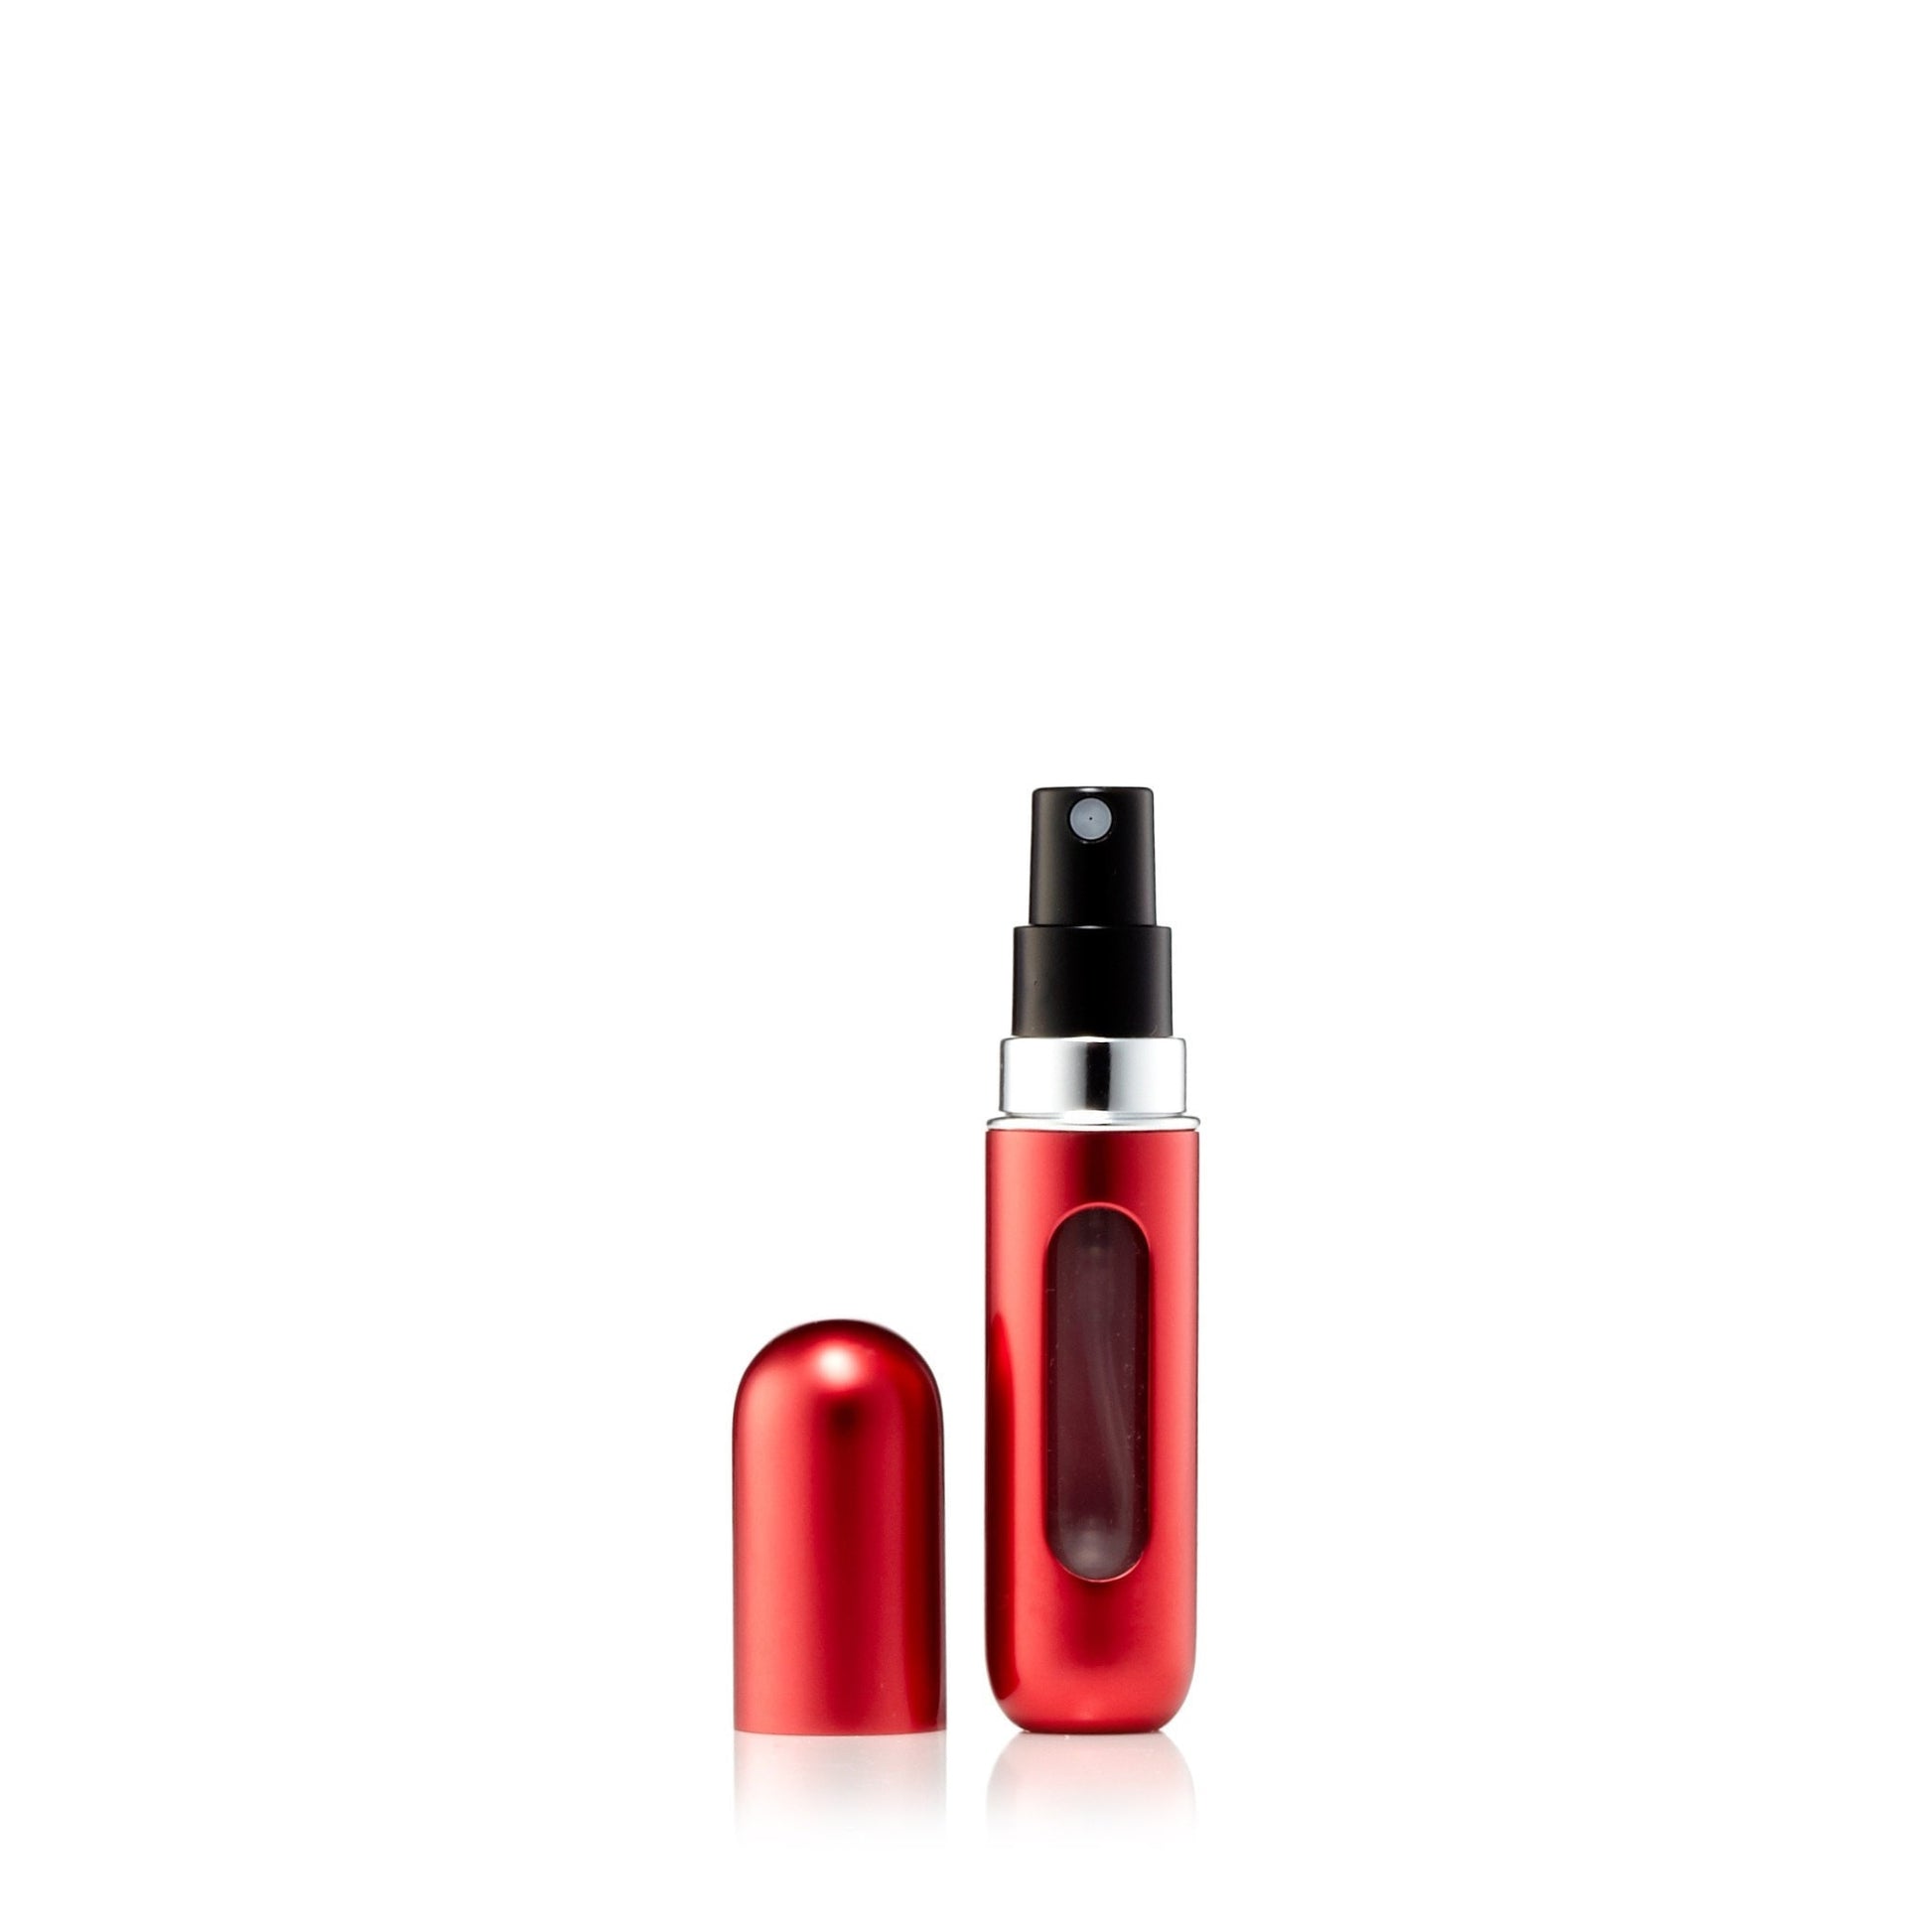 Travalo Refillable Fragrance Spray Atomizer Atomizer Unisex Accessories Red Click to open in modal